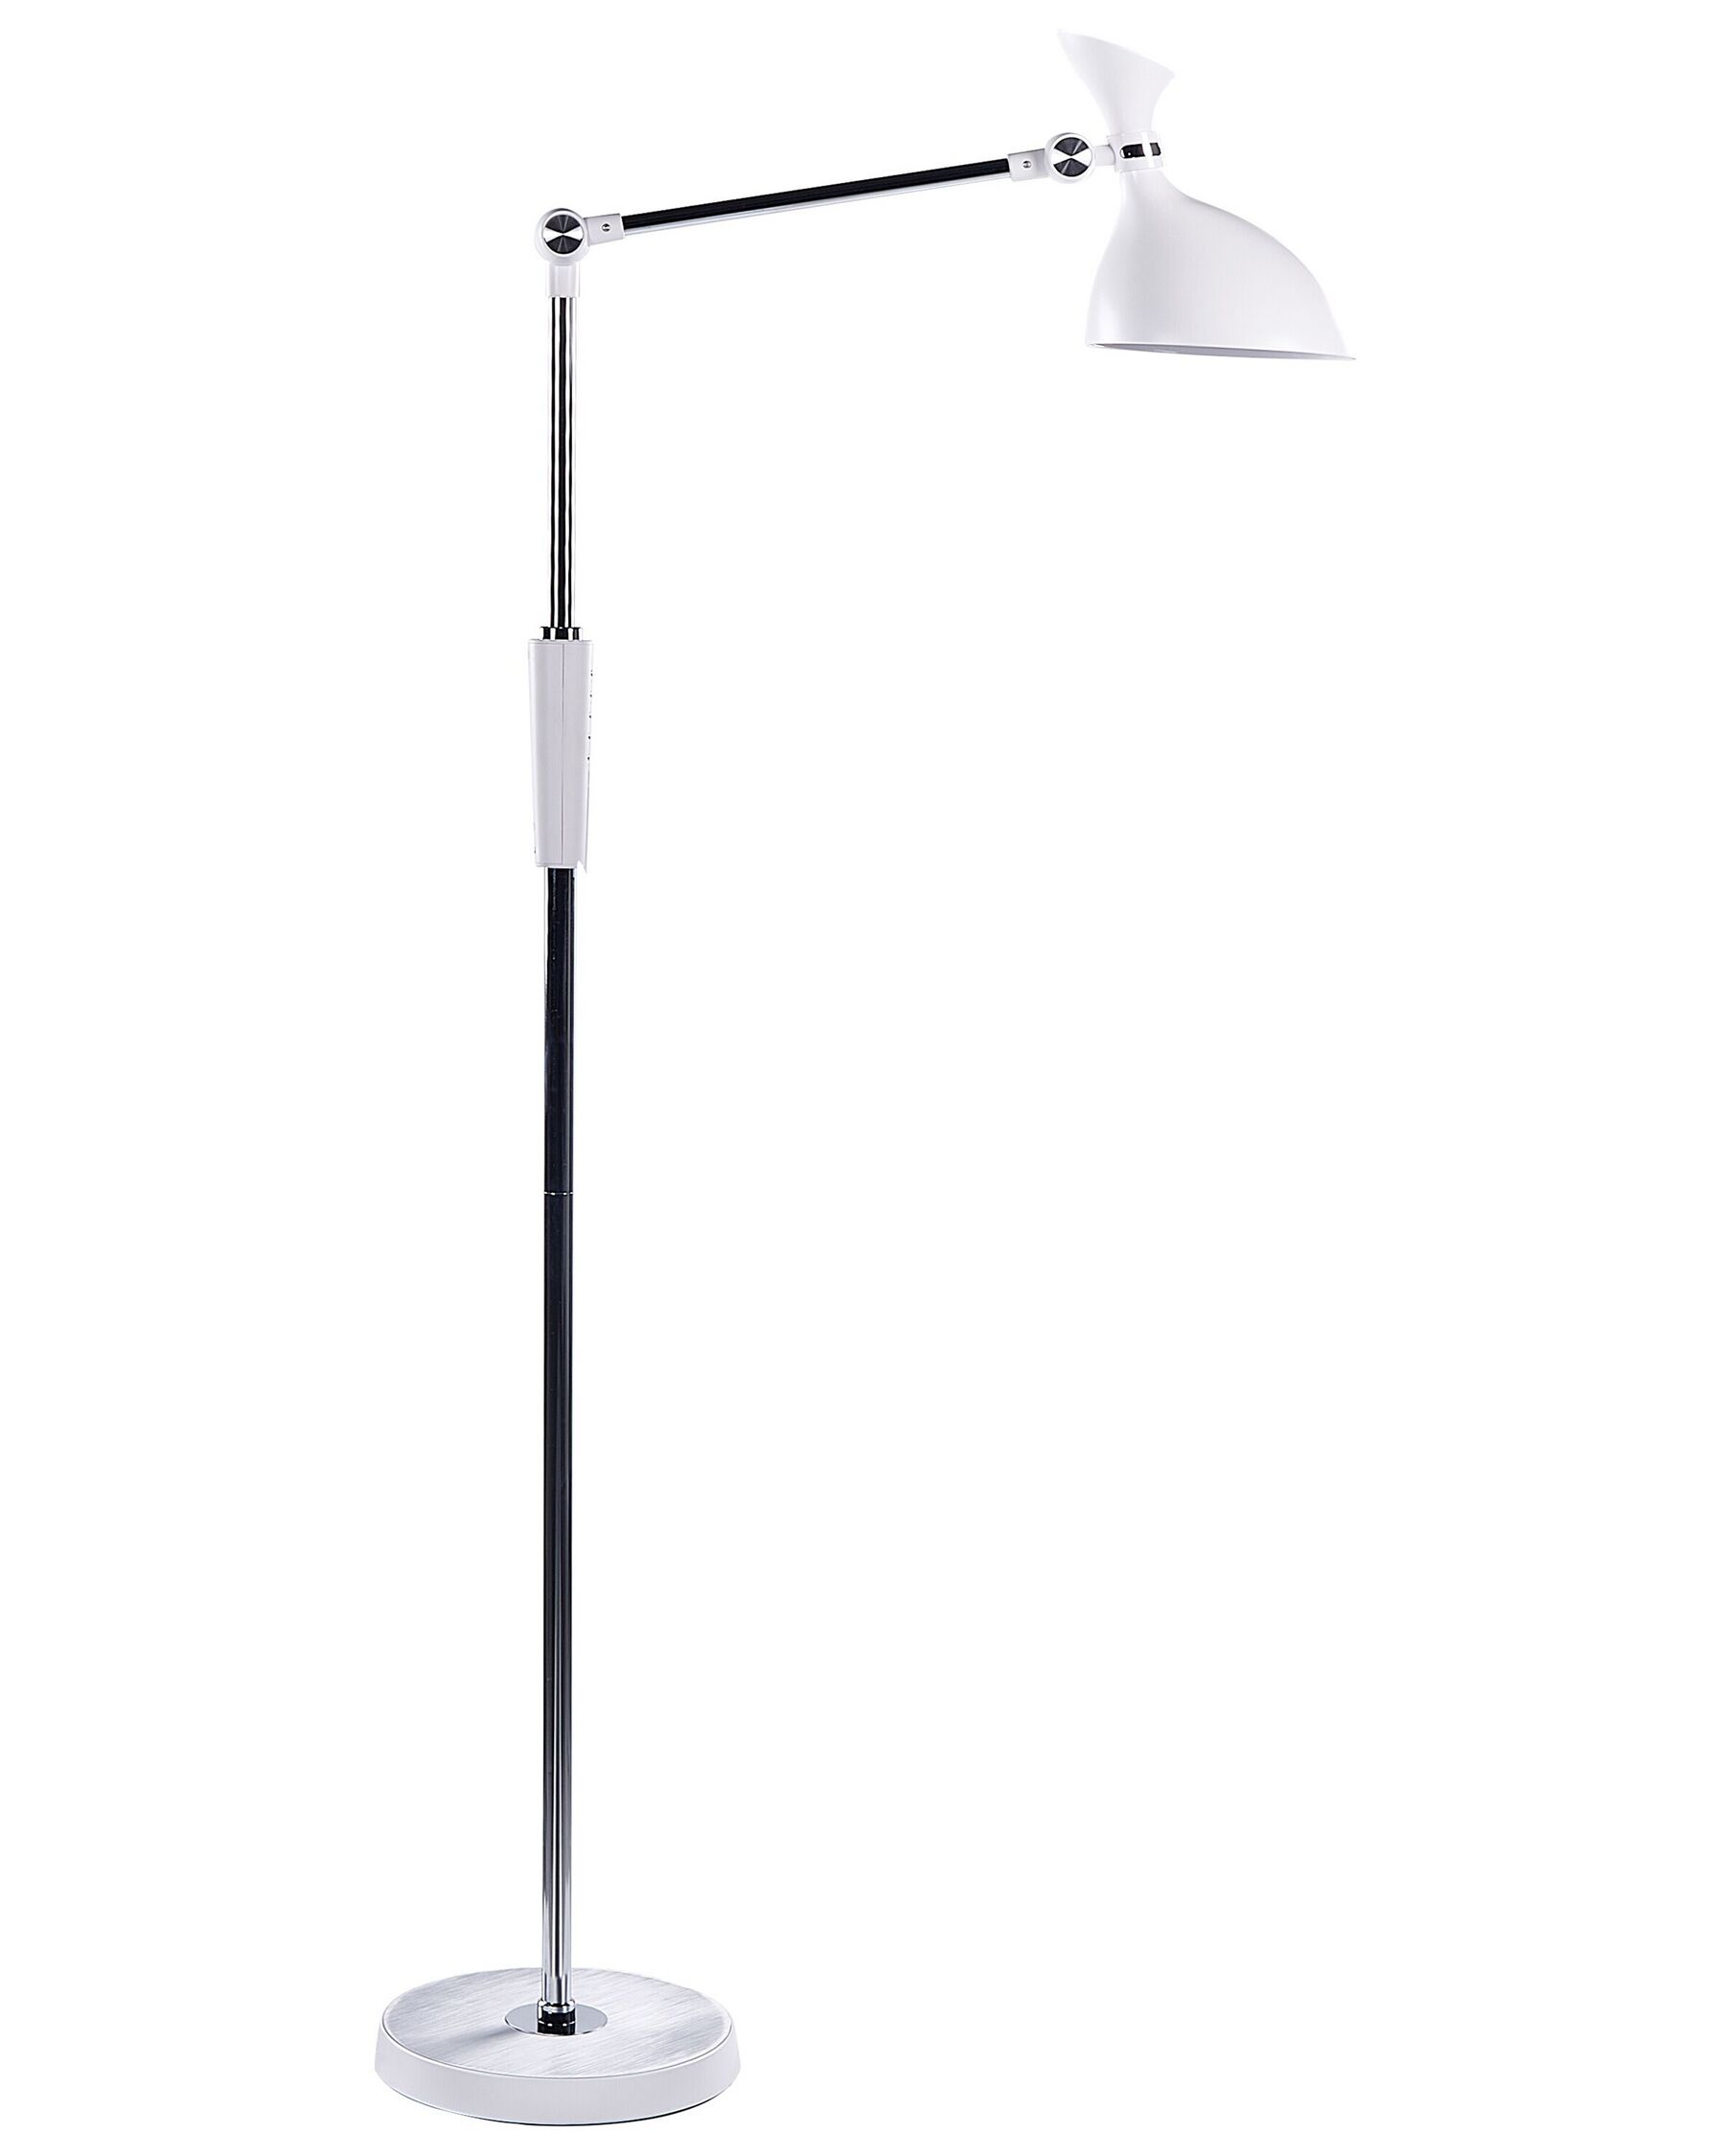 Stehlampe LED weiss 169 cm ANDROMEDA_855331